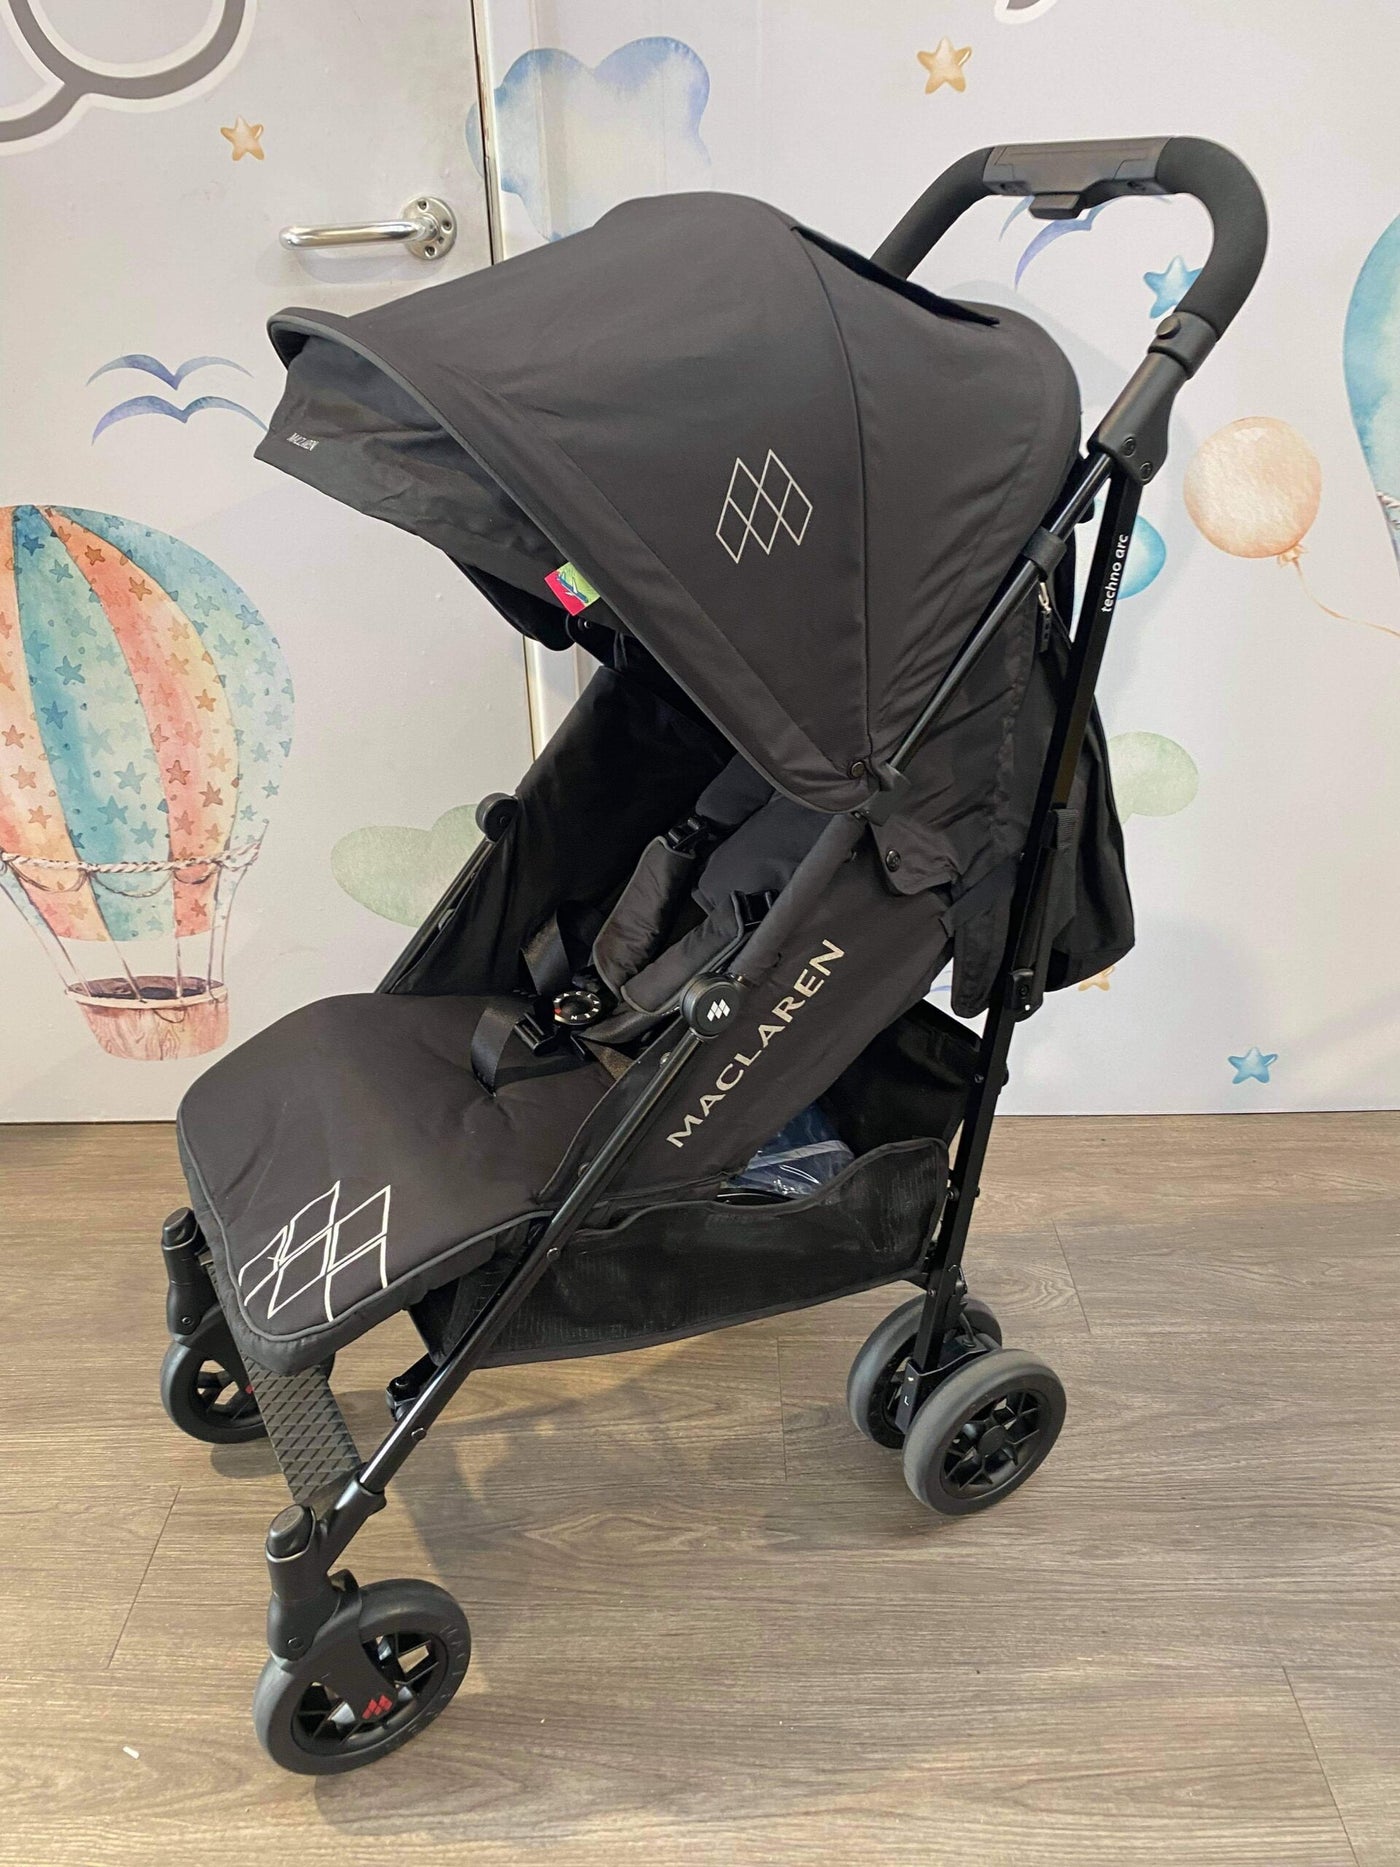 Pre-Loved Pushchairs & Strollers